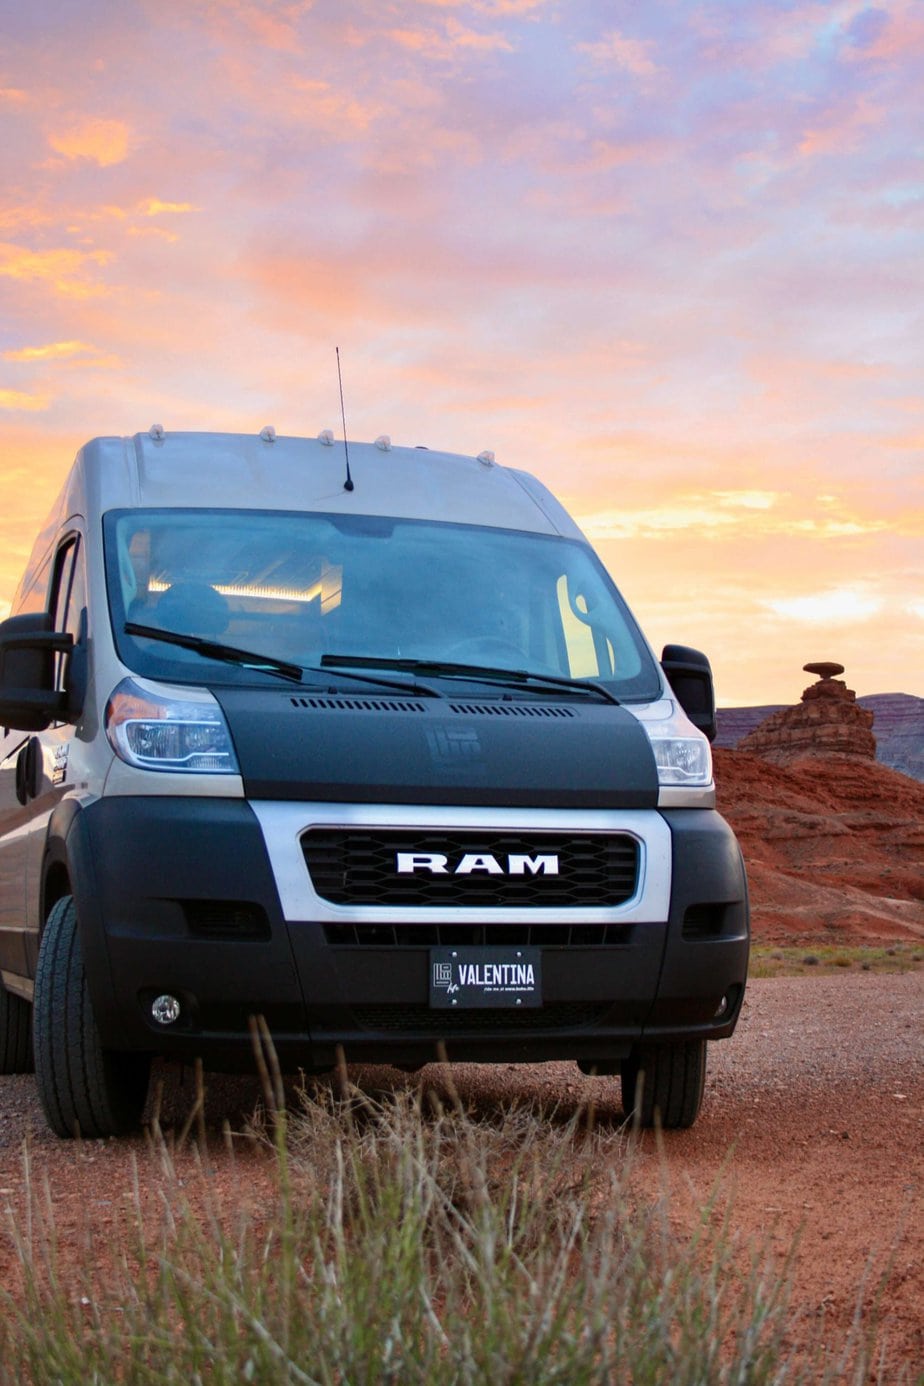 Ram Van Parked Behind a Bush in the Desert with a Pink and Yellow Sky in the Background